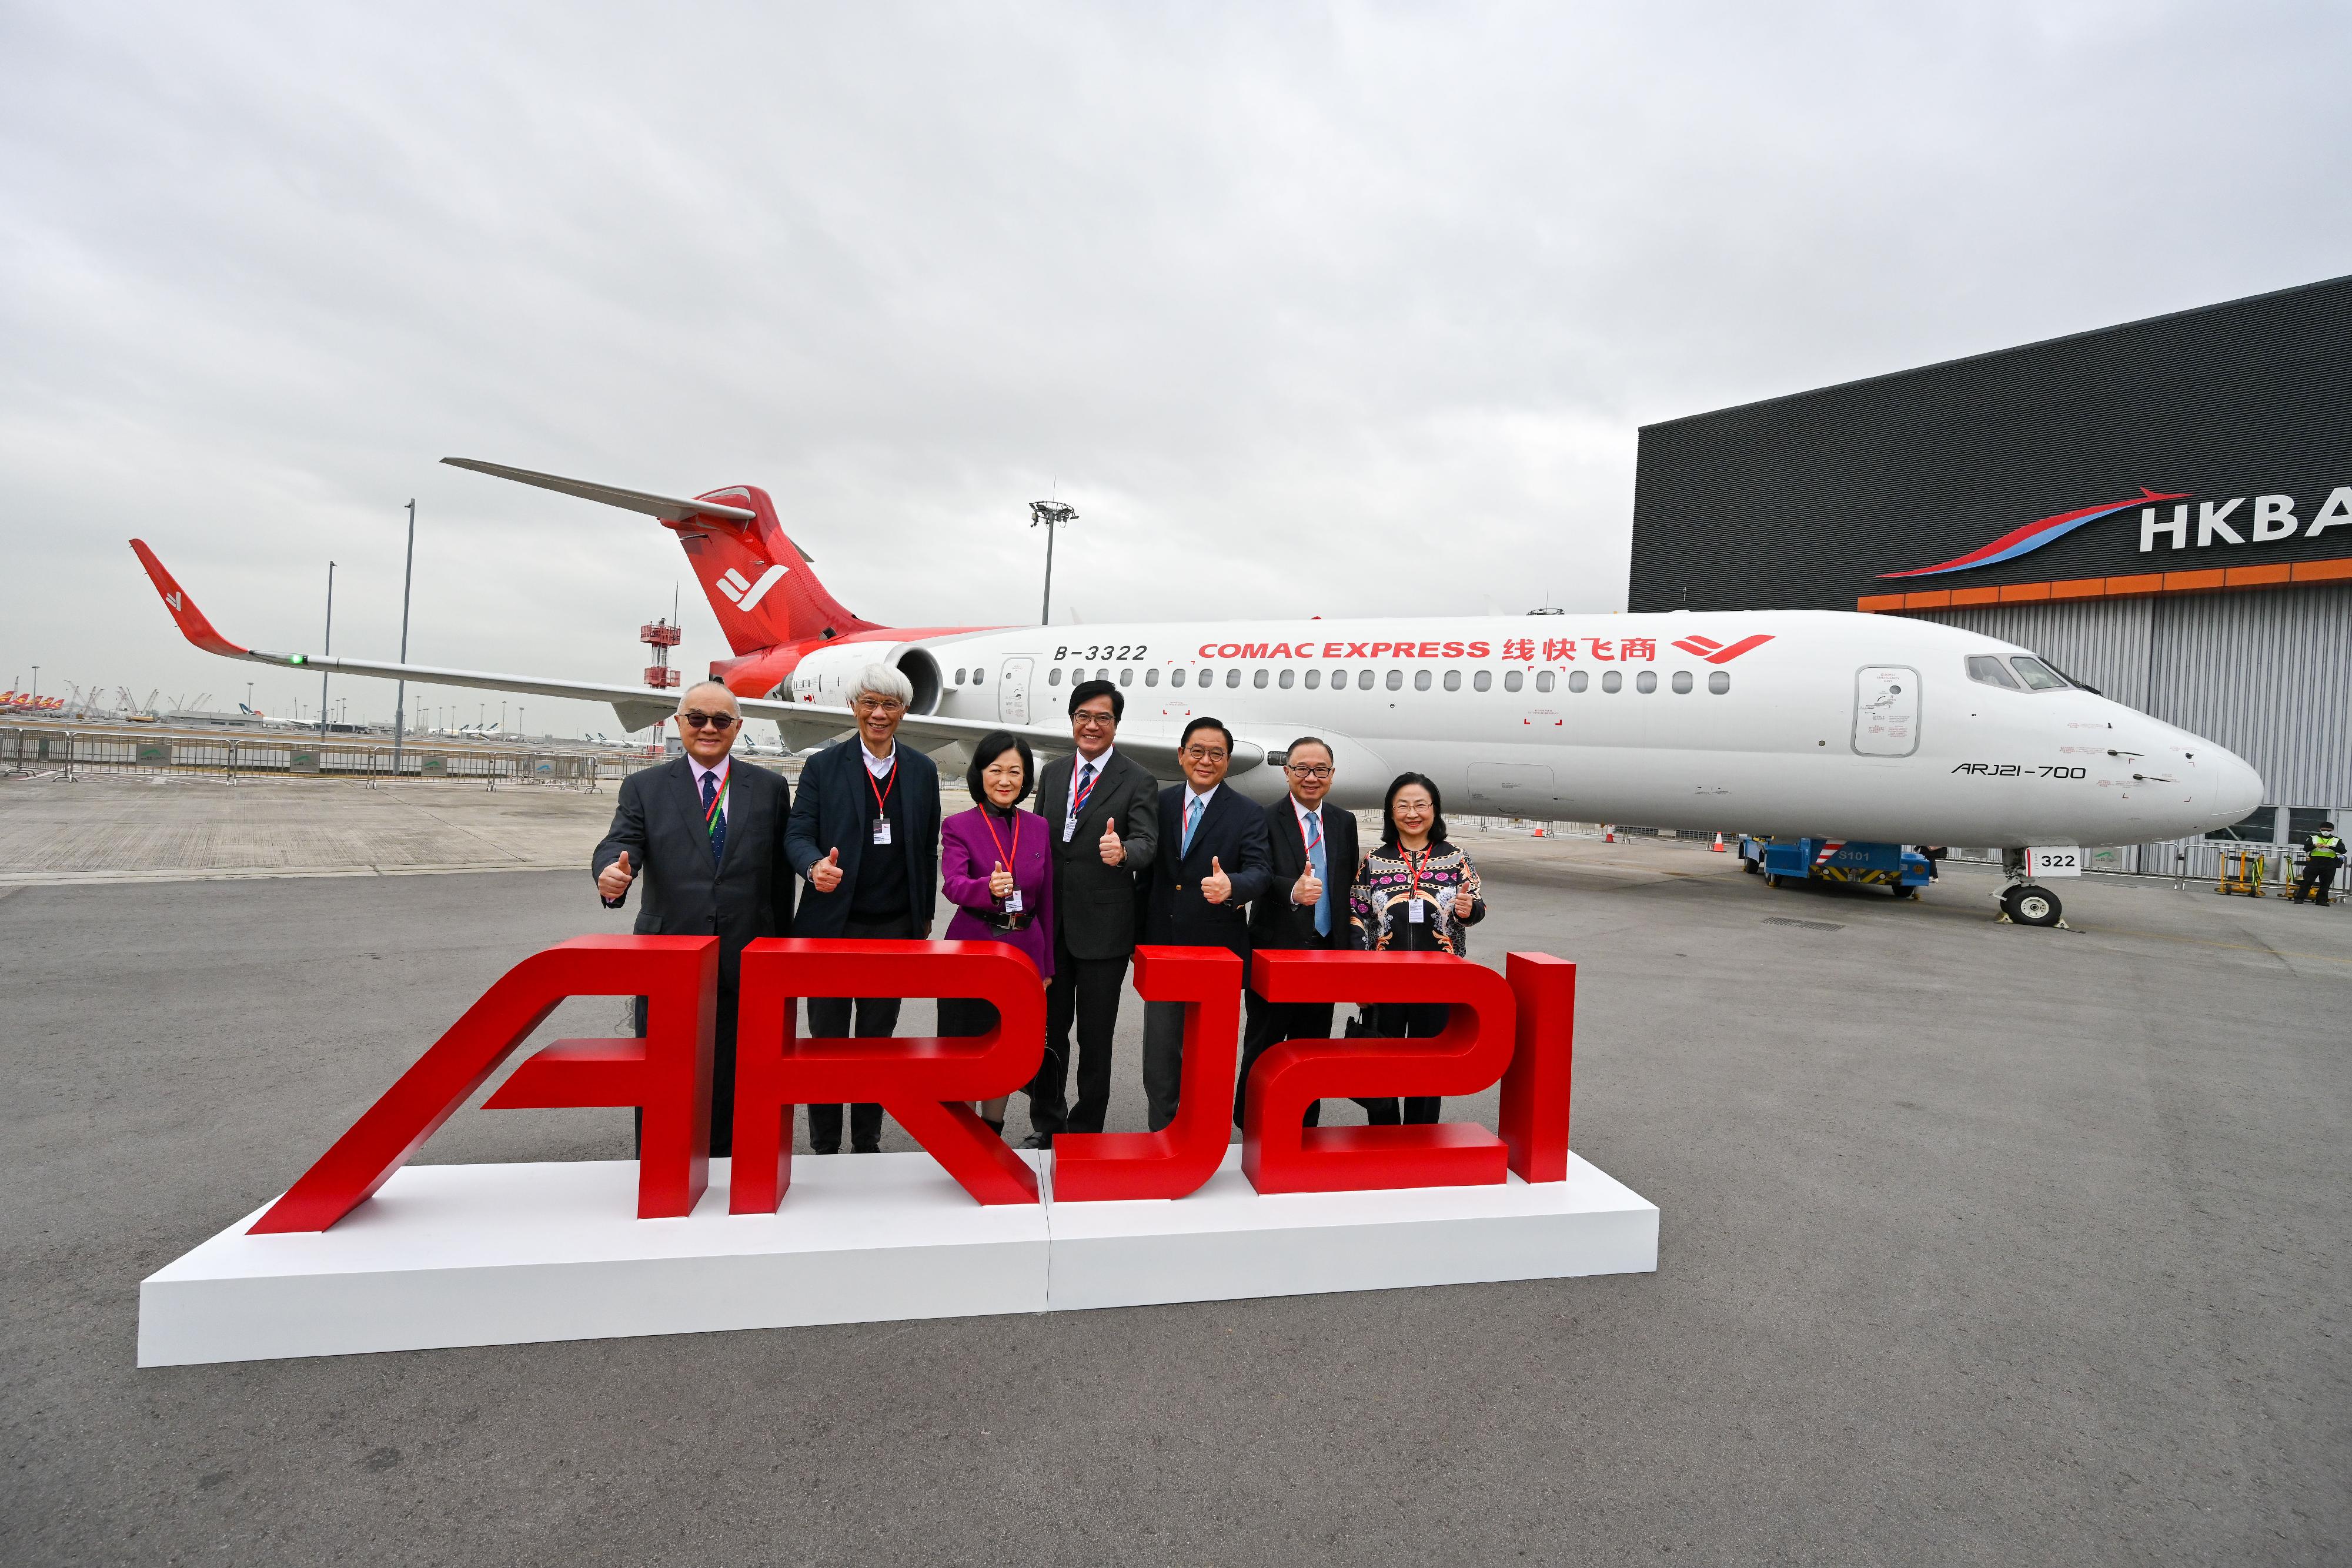 Non-official Members of the Executive Council (ExCo Non-official Members) today (December 14) visited the home-developed aircraft C919 and ARJ21. Photo shows the ExCo Non-official Members with the Deputy Financial Secretary, Mr Michael Wong (centre), in front of aircraft ARJ21.